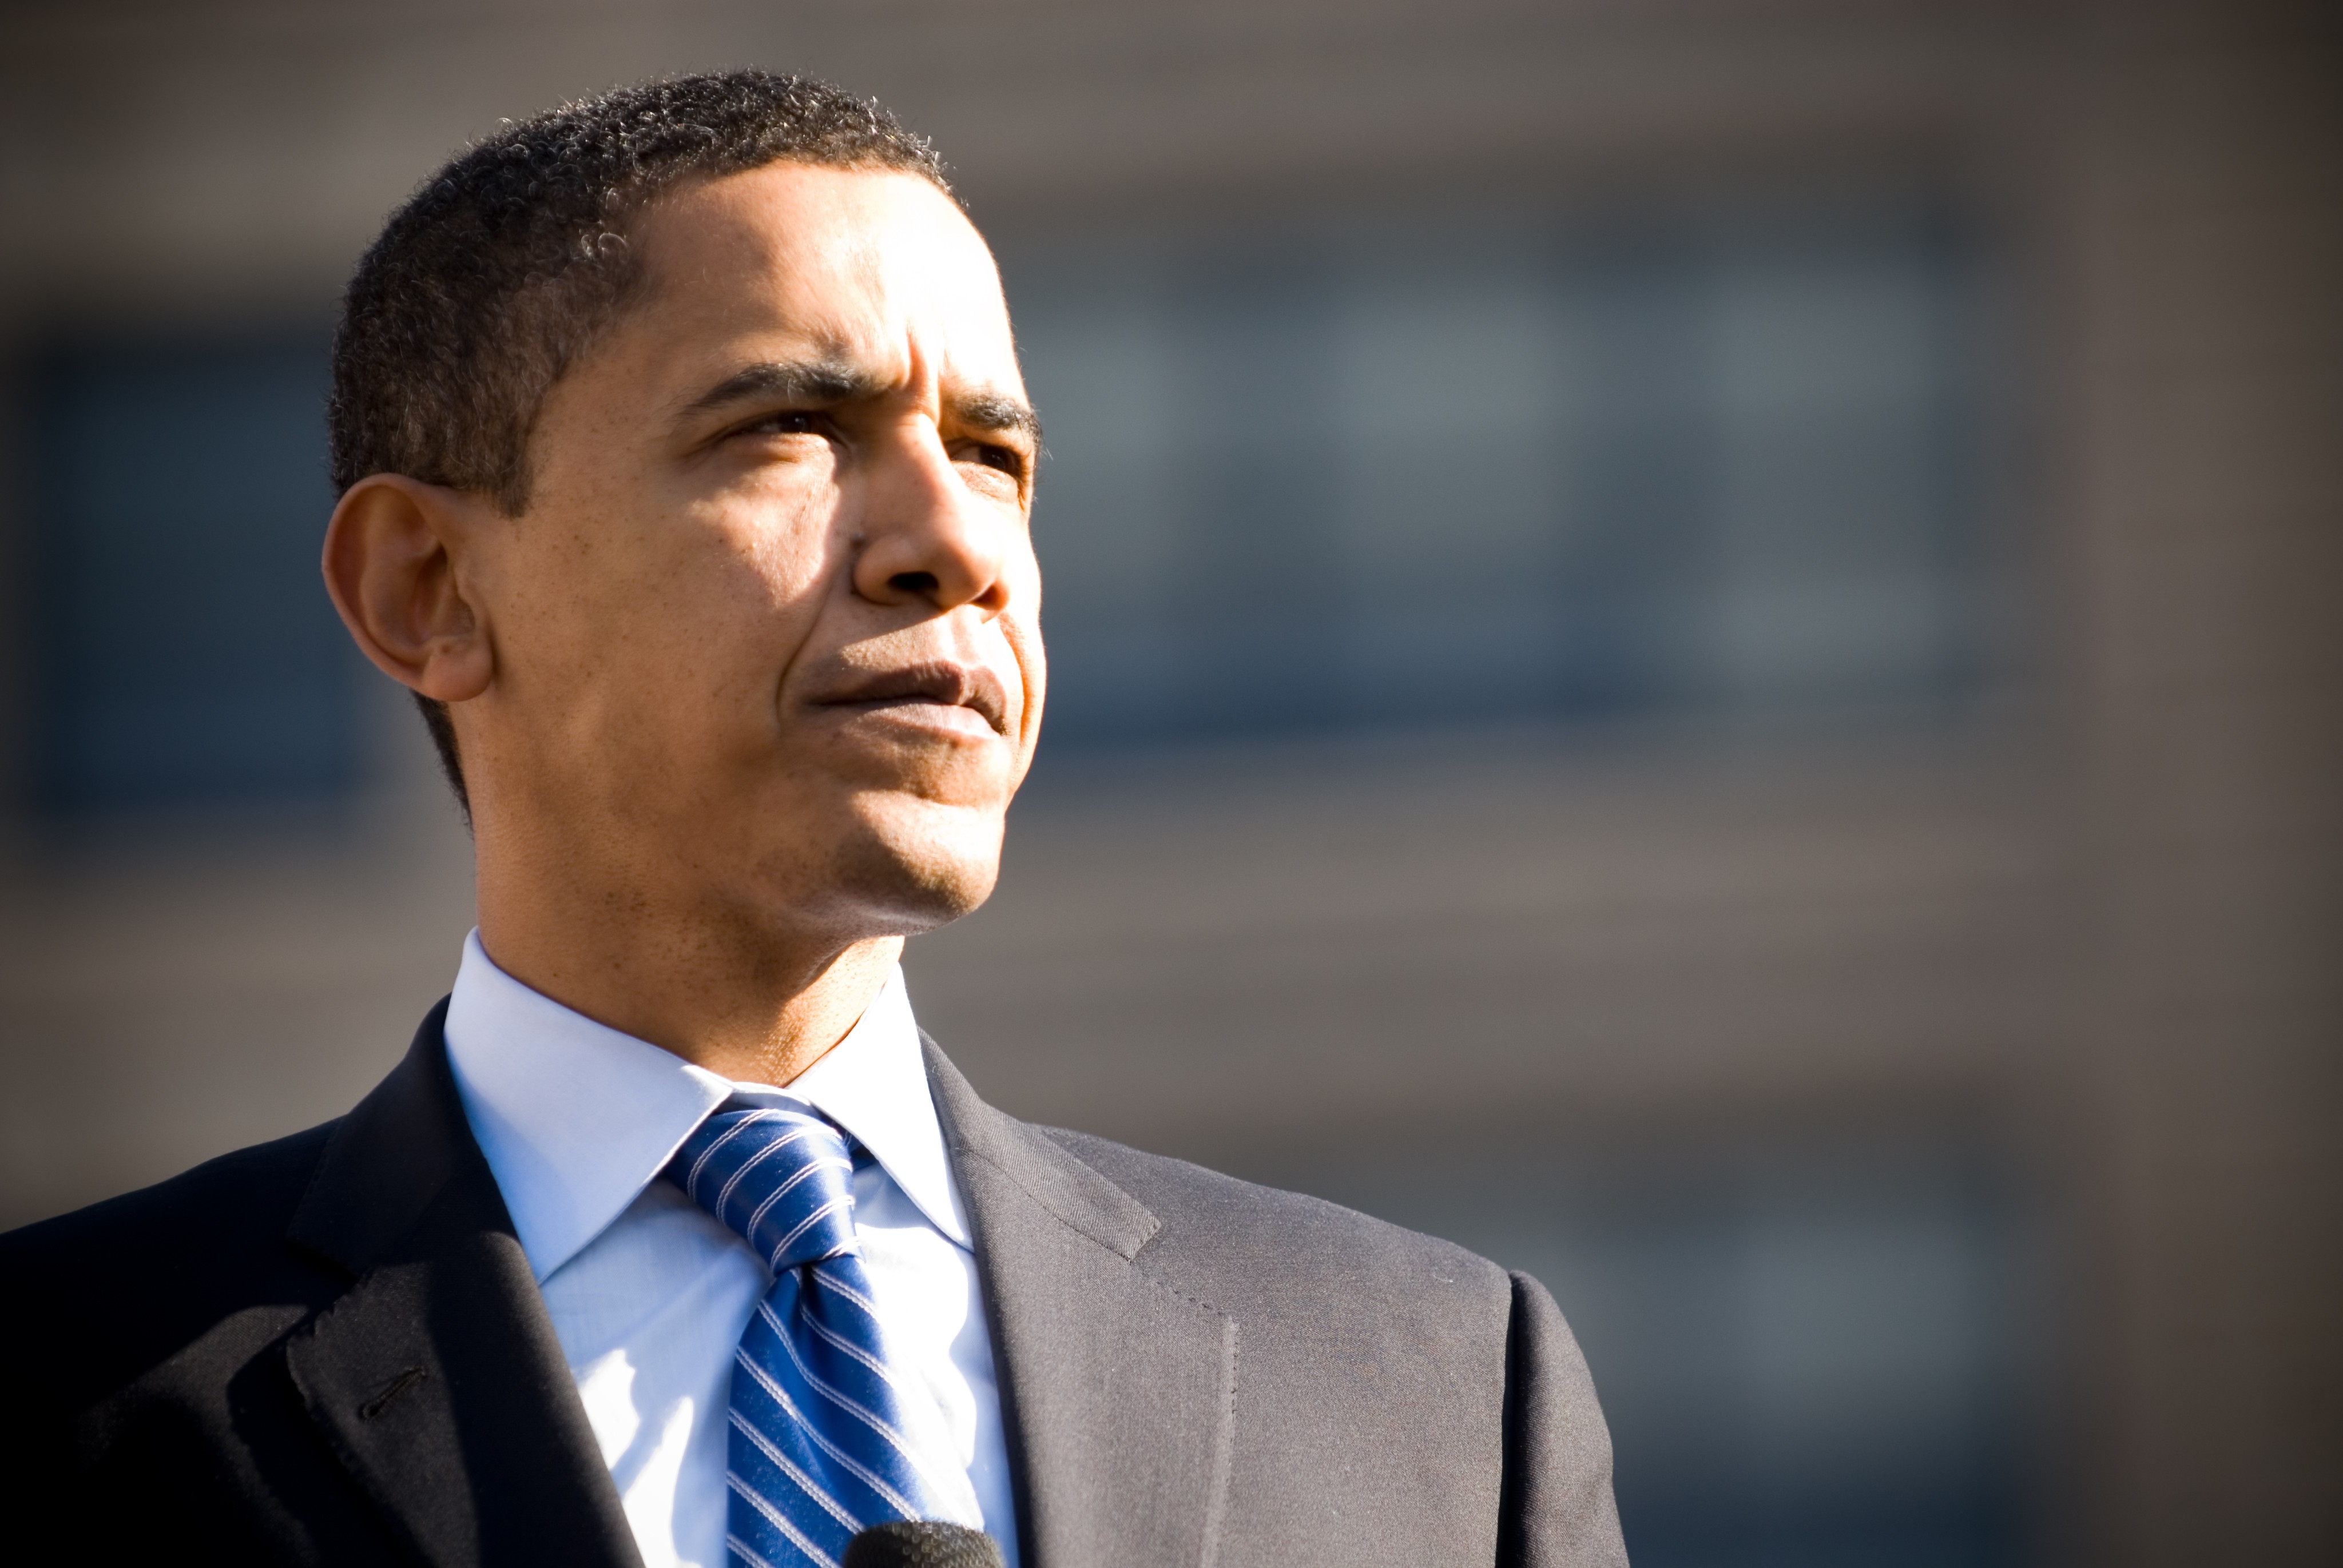 Obama HD Wallpapers